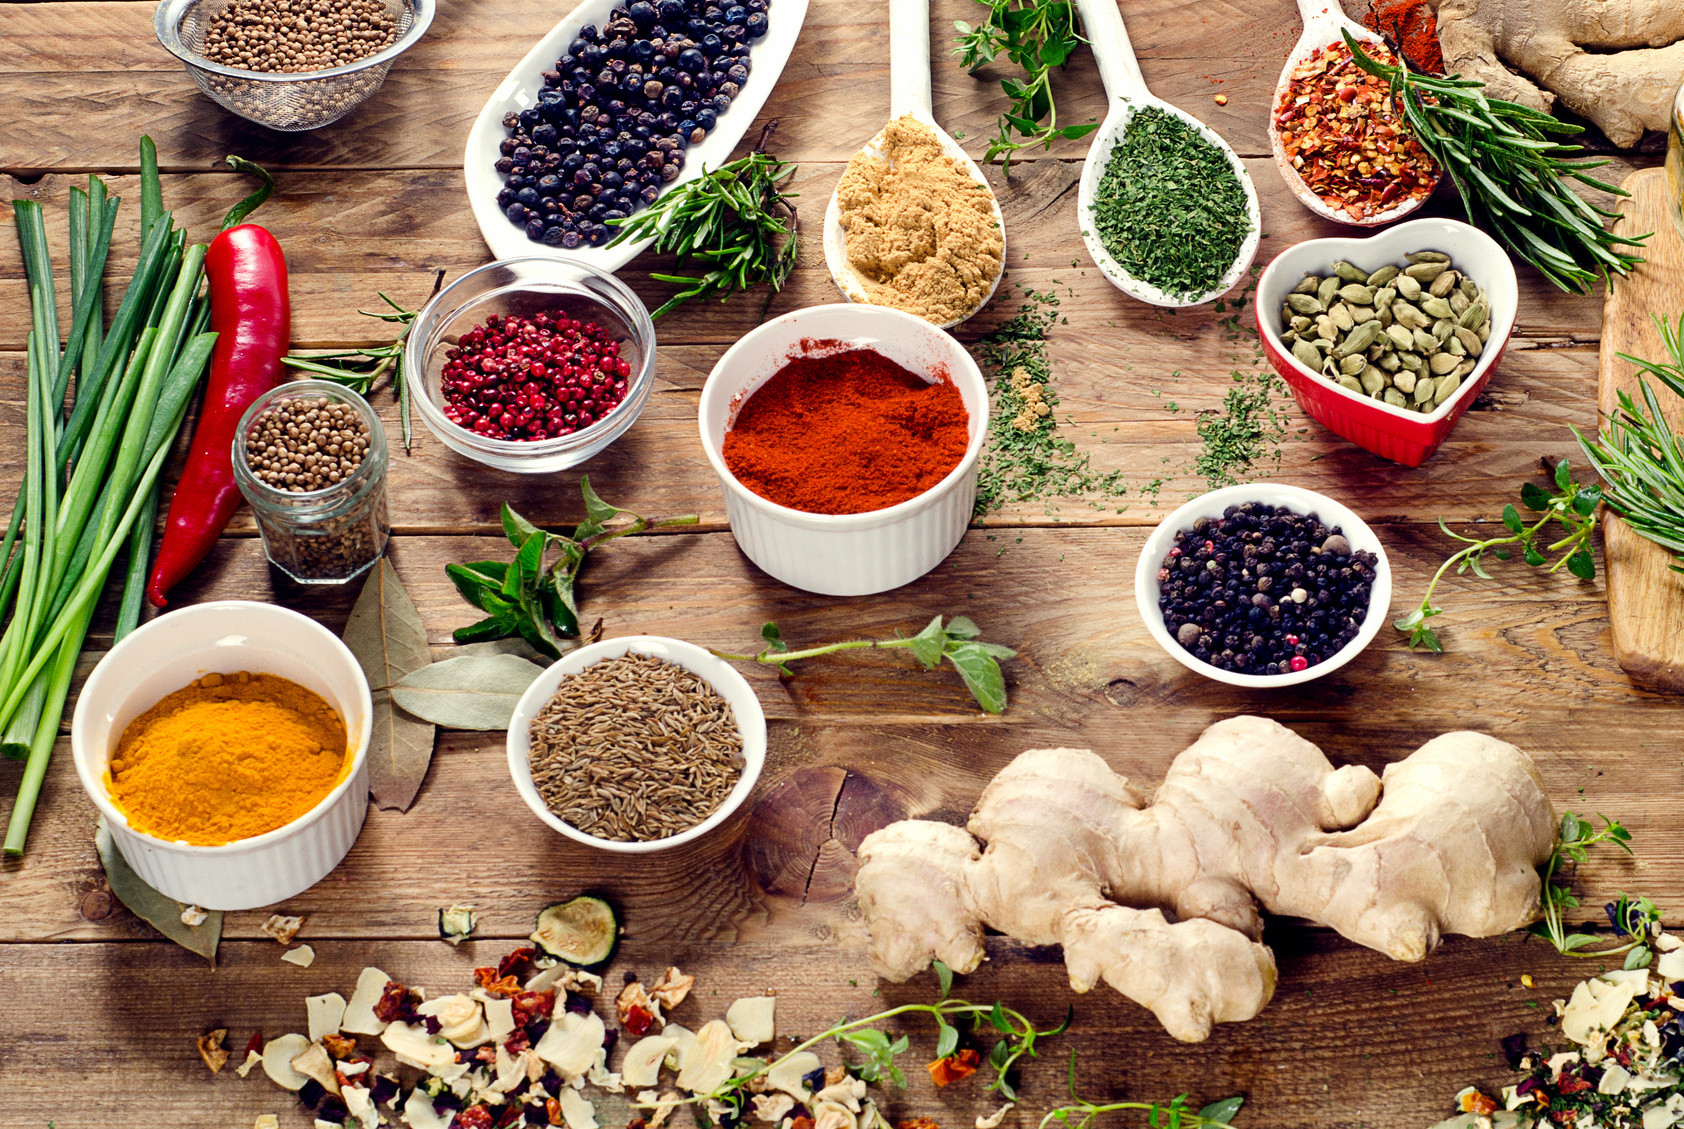 Herbs and Spices: An Underrated Source of Health Benefits